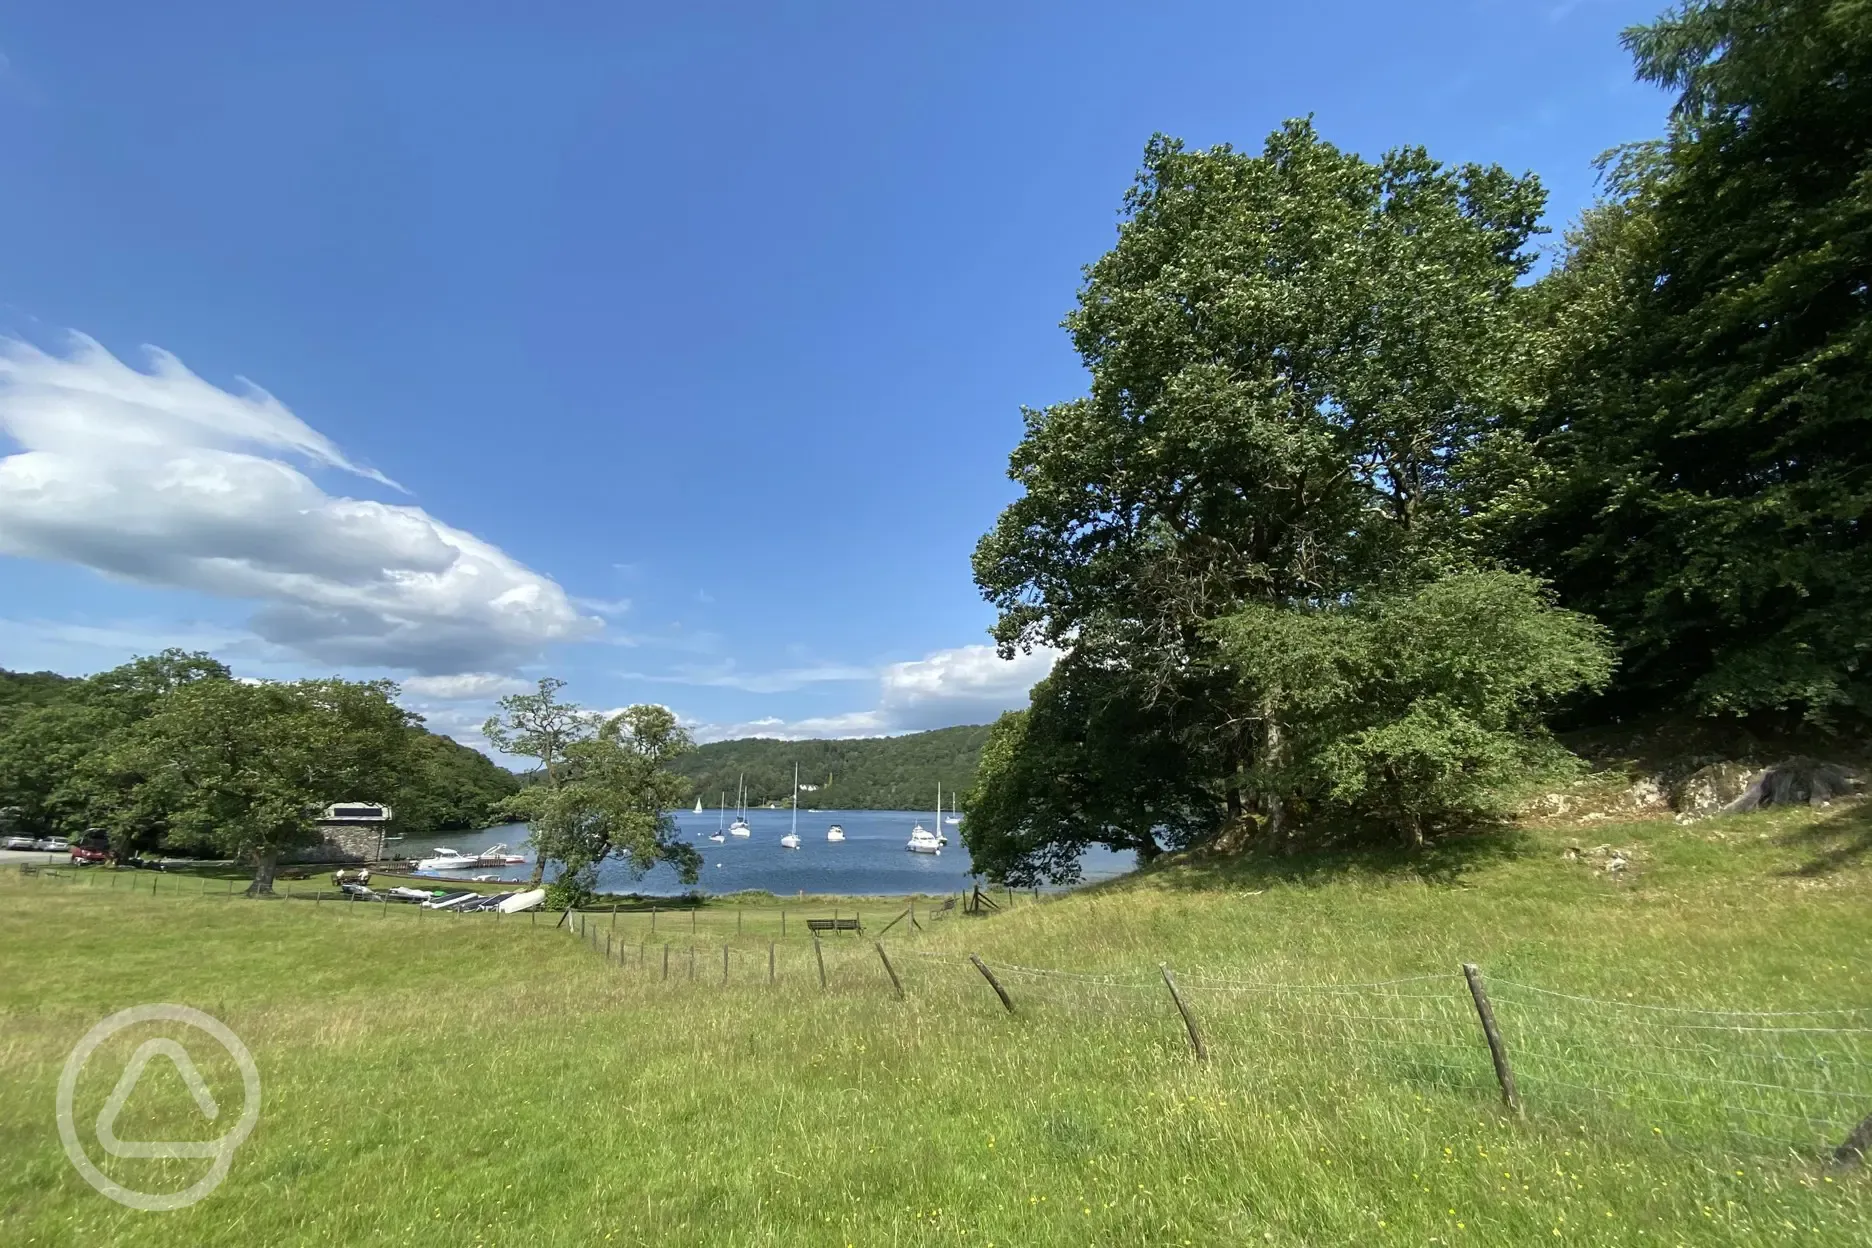 Non electric grass pitches and views of Lake Windemere